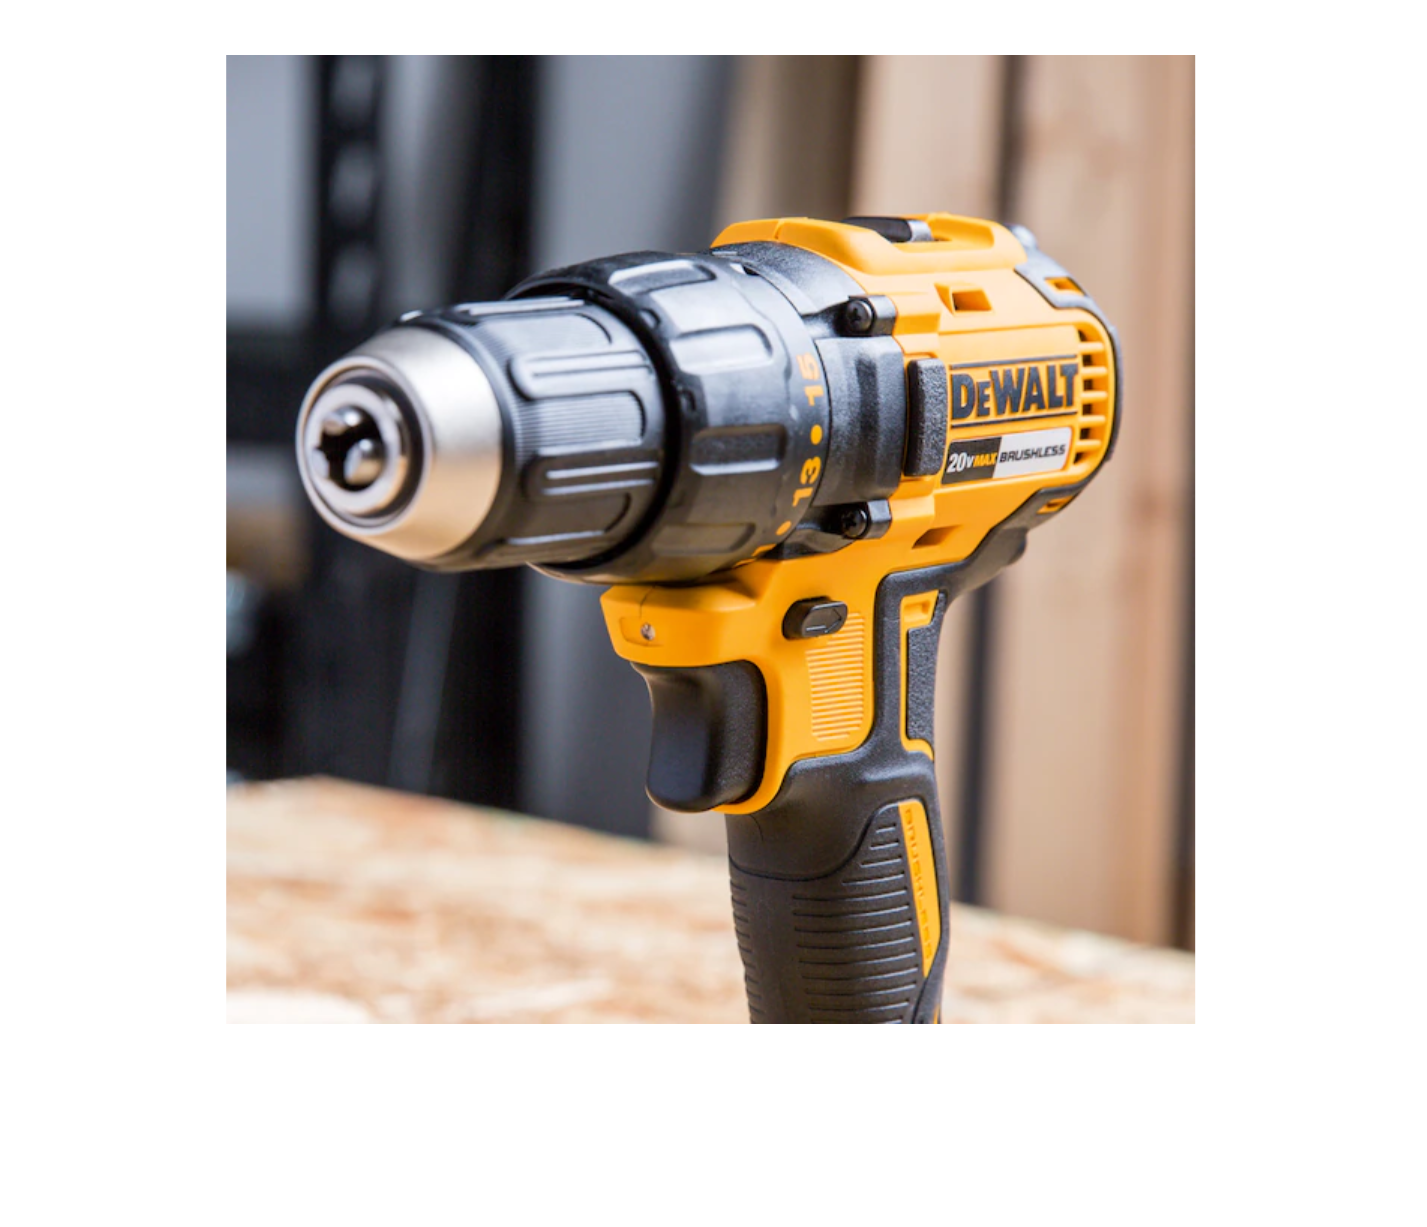 DEWALT DCD777C2 20-volt Max 1/2-in Brushless Cordless Drill (2-Batteries  Included and Charger Included)